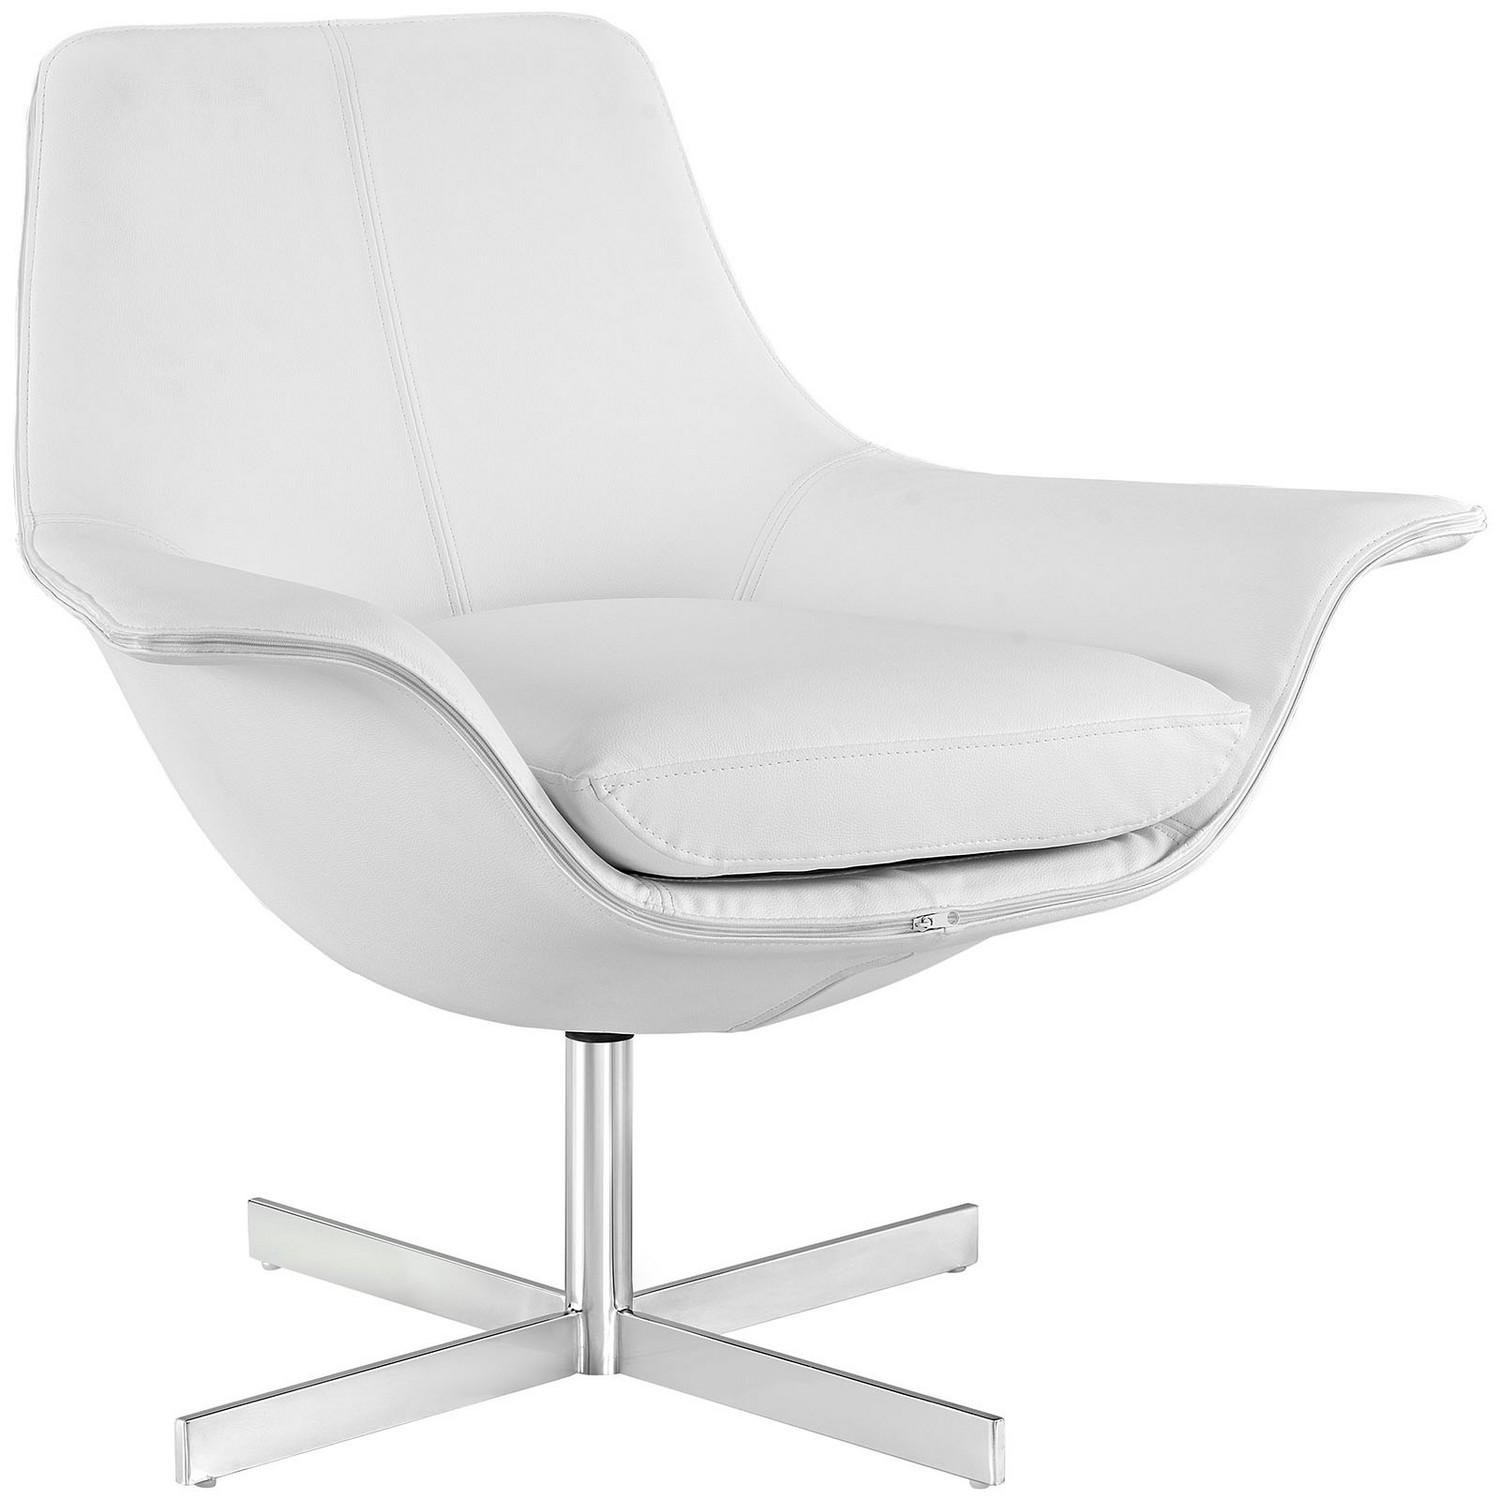 Modway Release Bonded Leather Lounge Chair - White